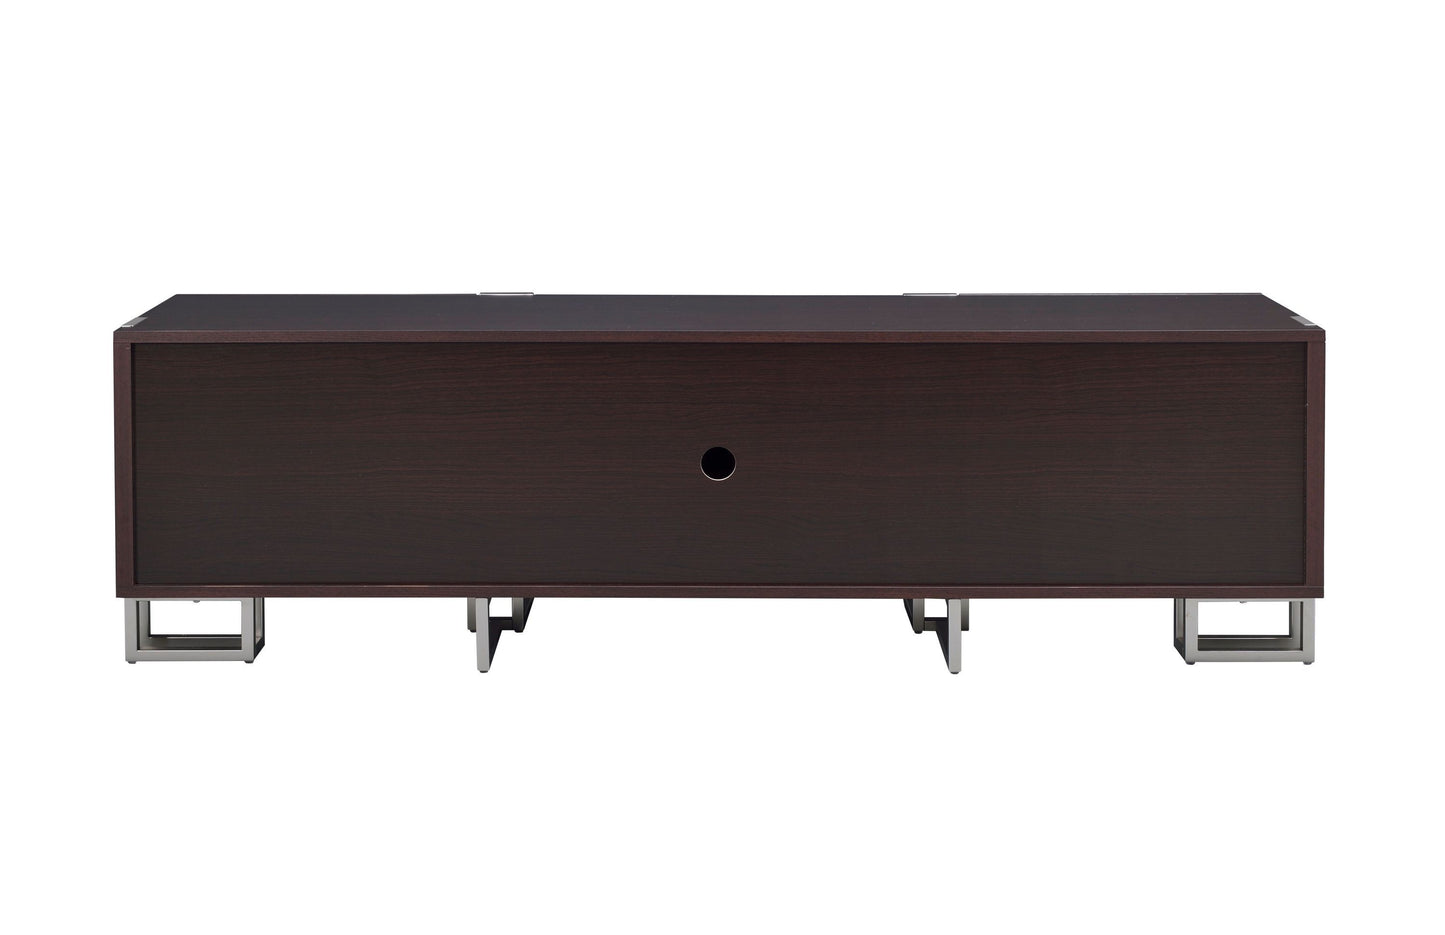 ACME Cattoes TV Stand in Dark Walnut & Nickel 91795 - Enova Luxe Home Store